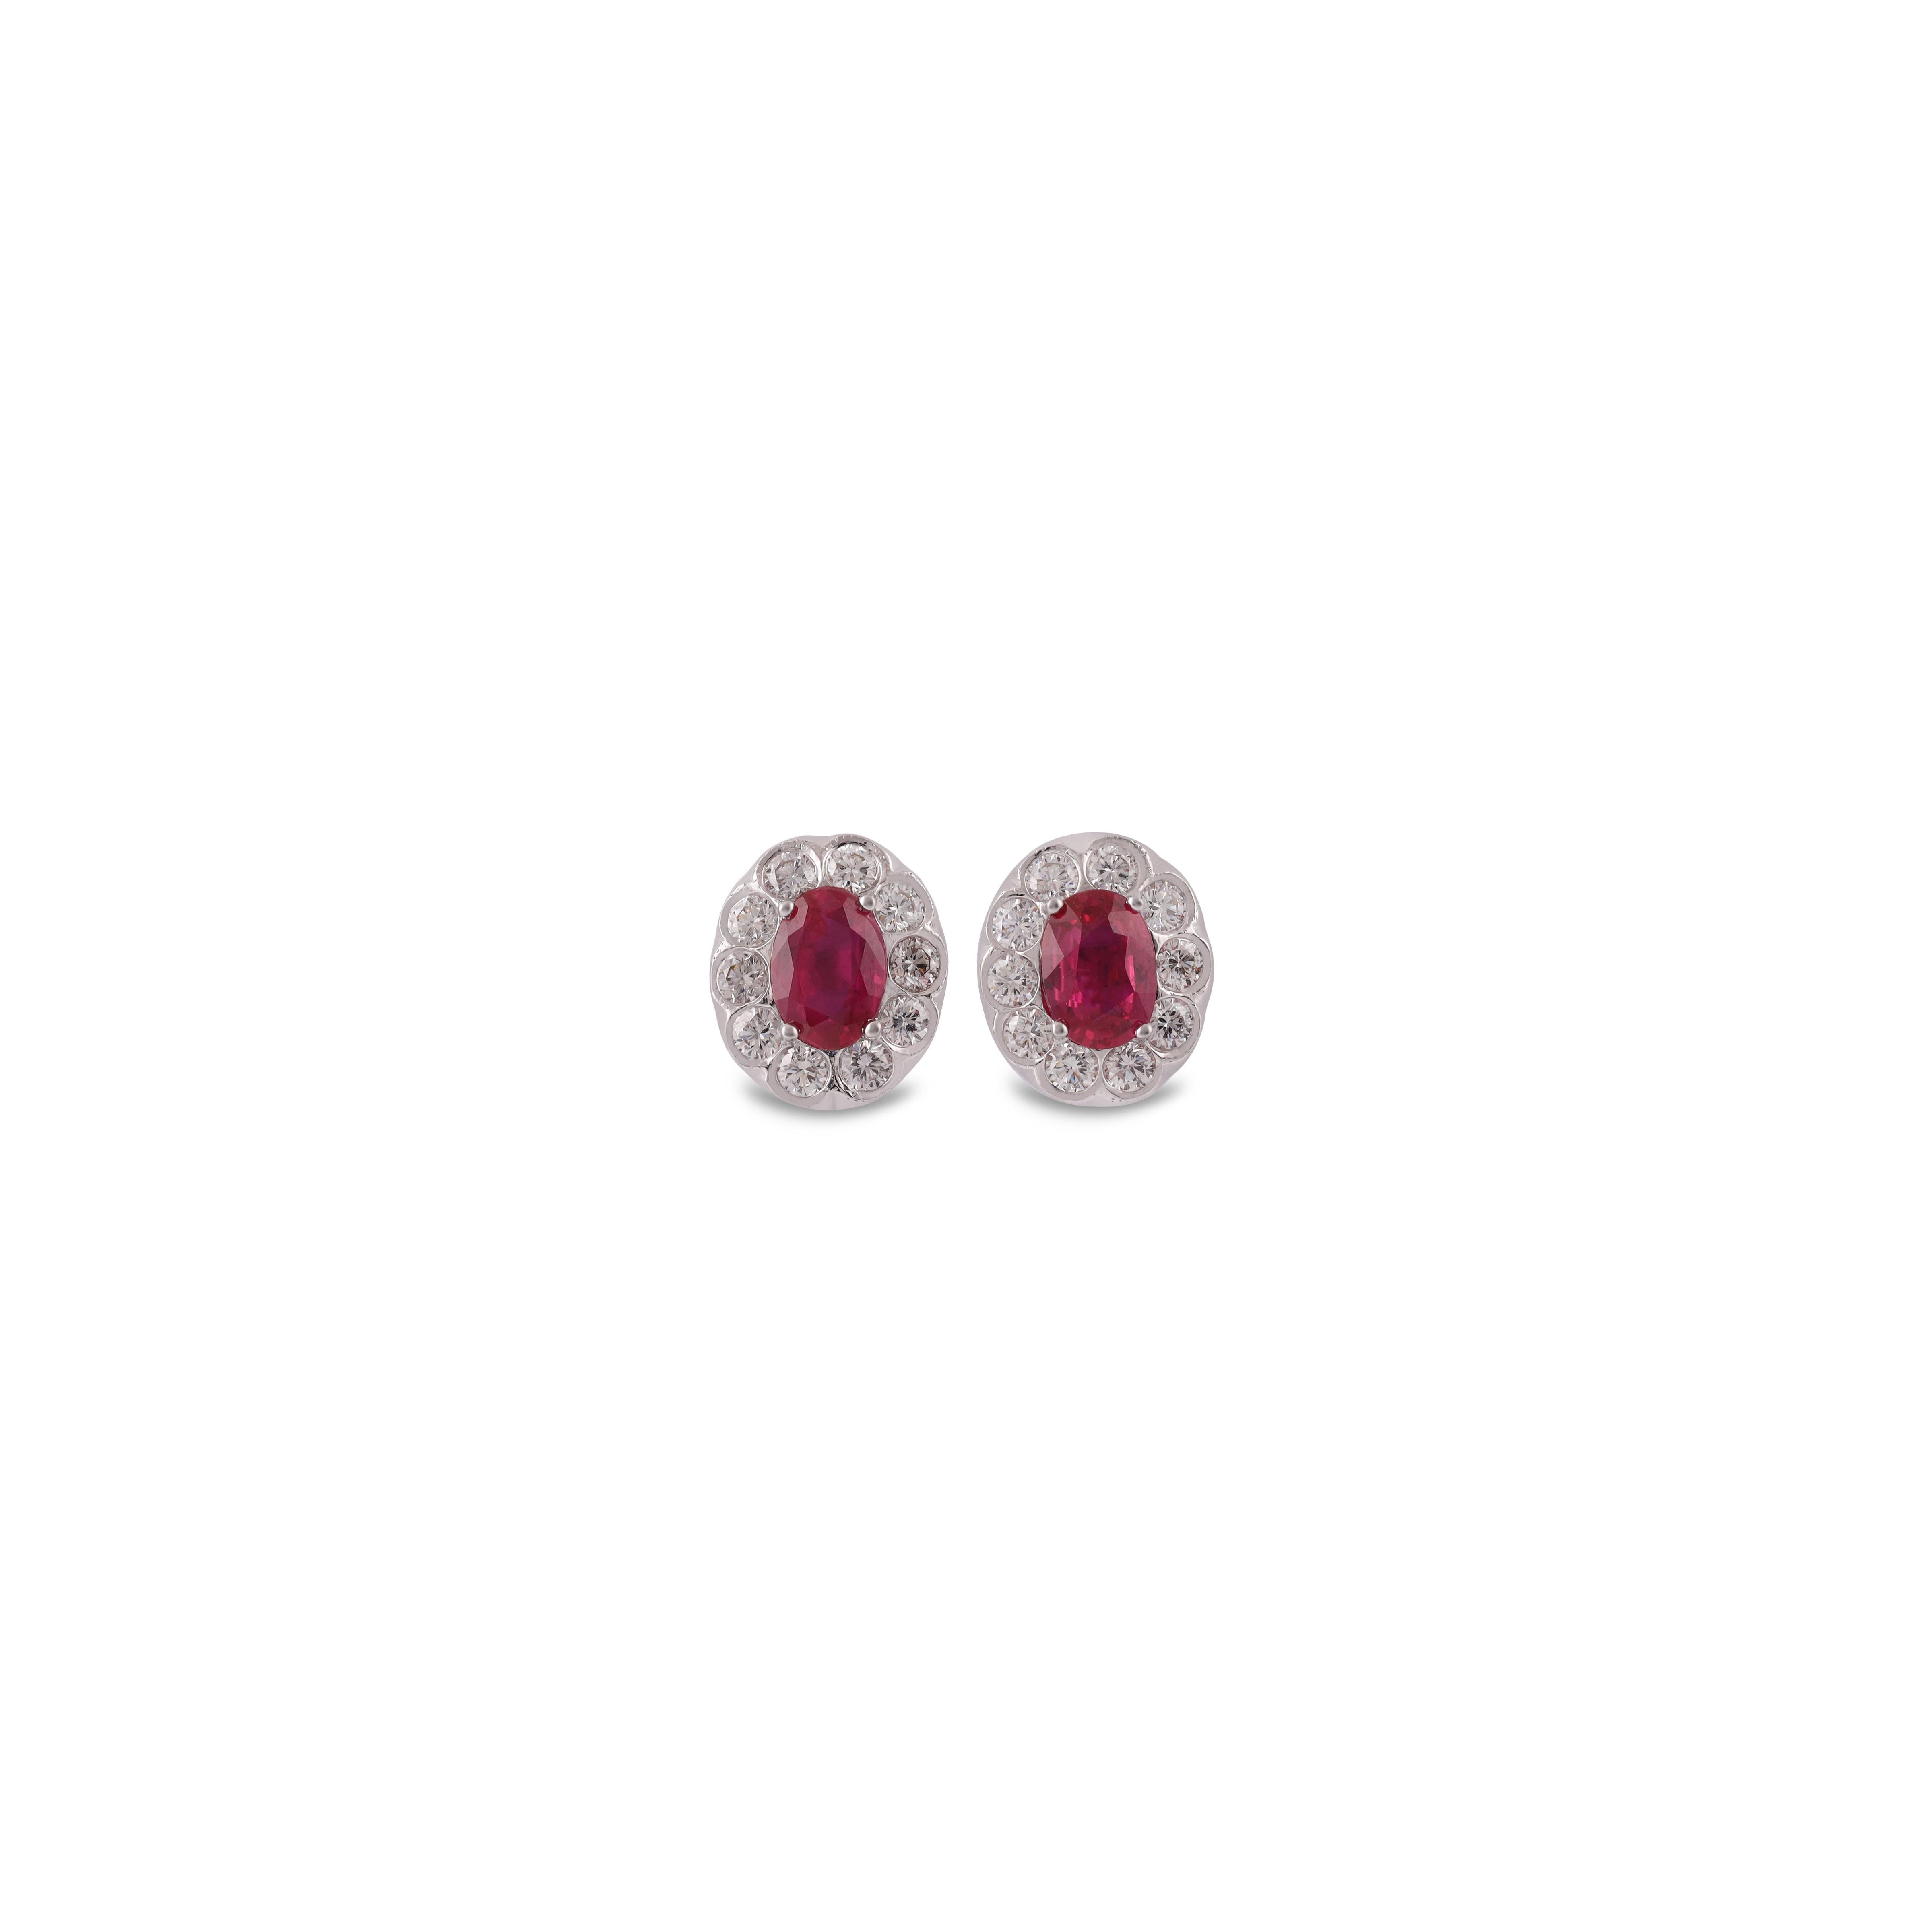 A stunning, fine and impressive pair of  2.12 carat Natural Mozambique Ruby & 1 Carat  Diamond with Solid 18k White Gold. 

Studs create a subtle beauty while showcasing the colors of the natural precious gemstones and illuminating diamonds making a